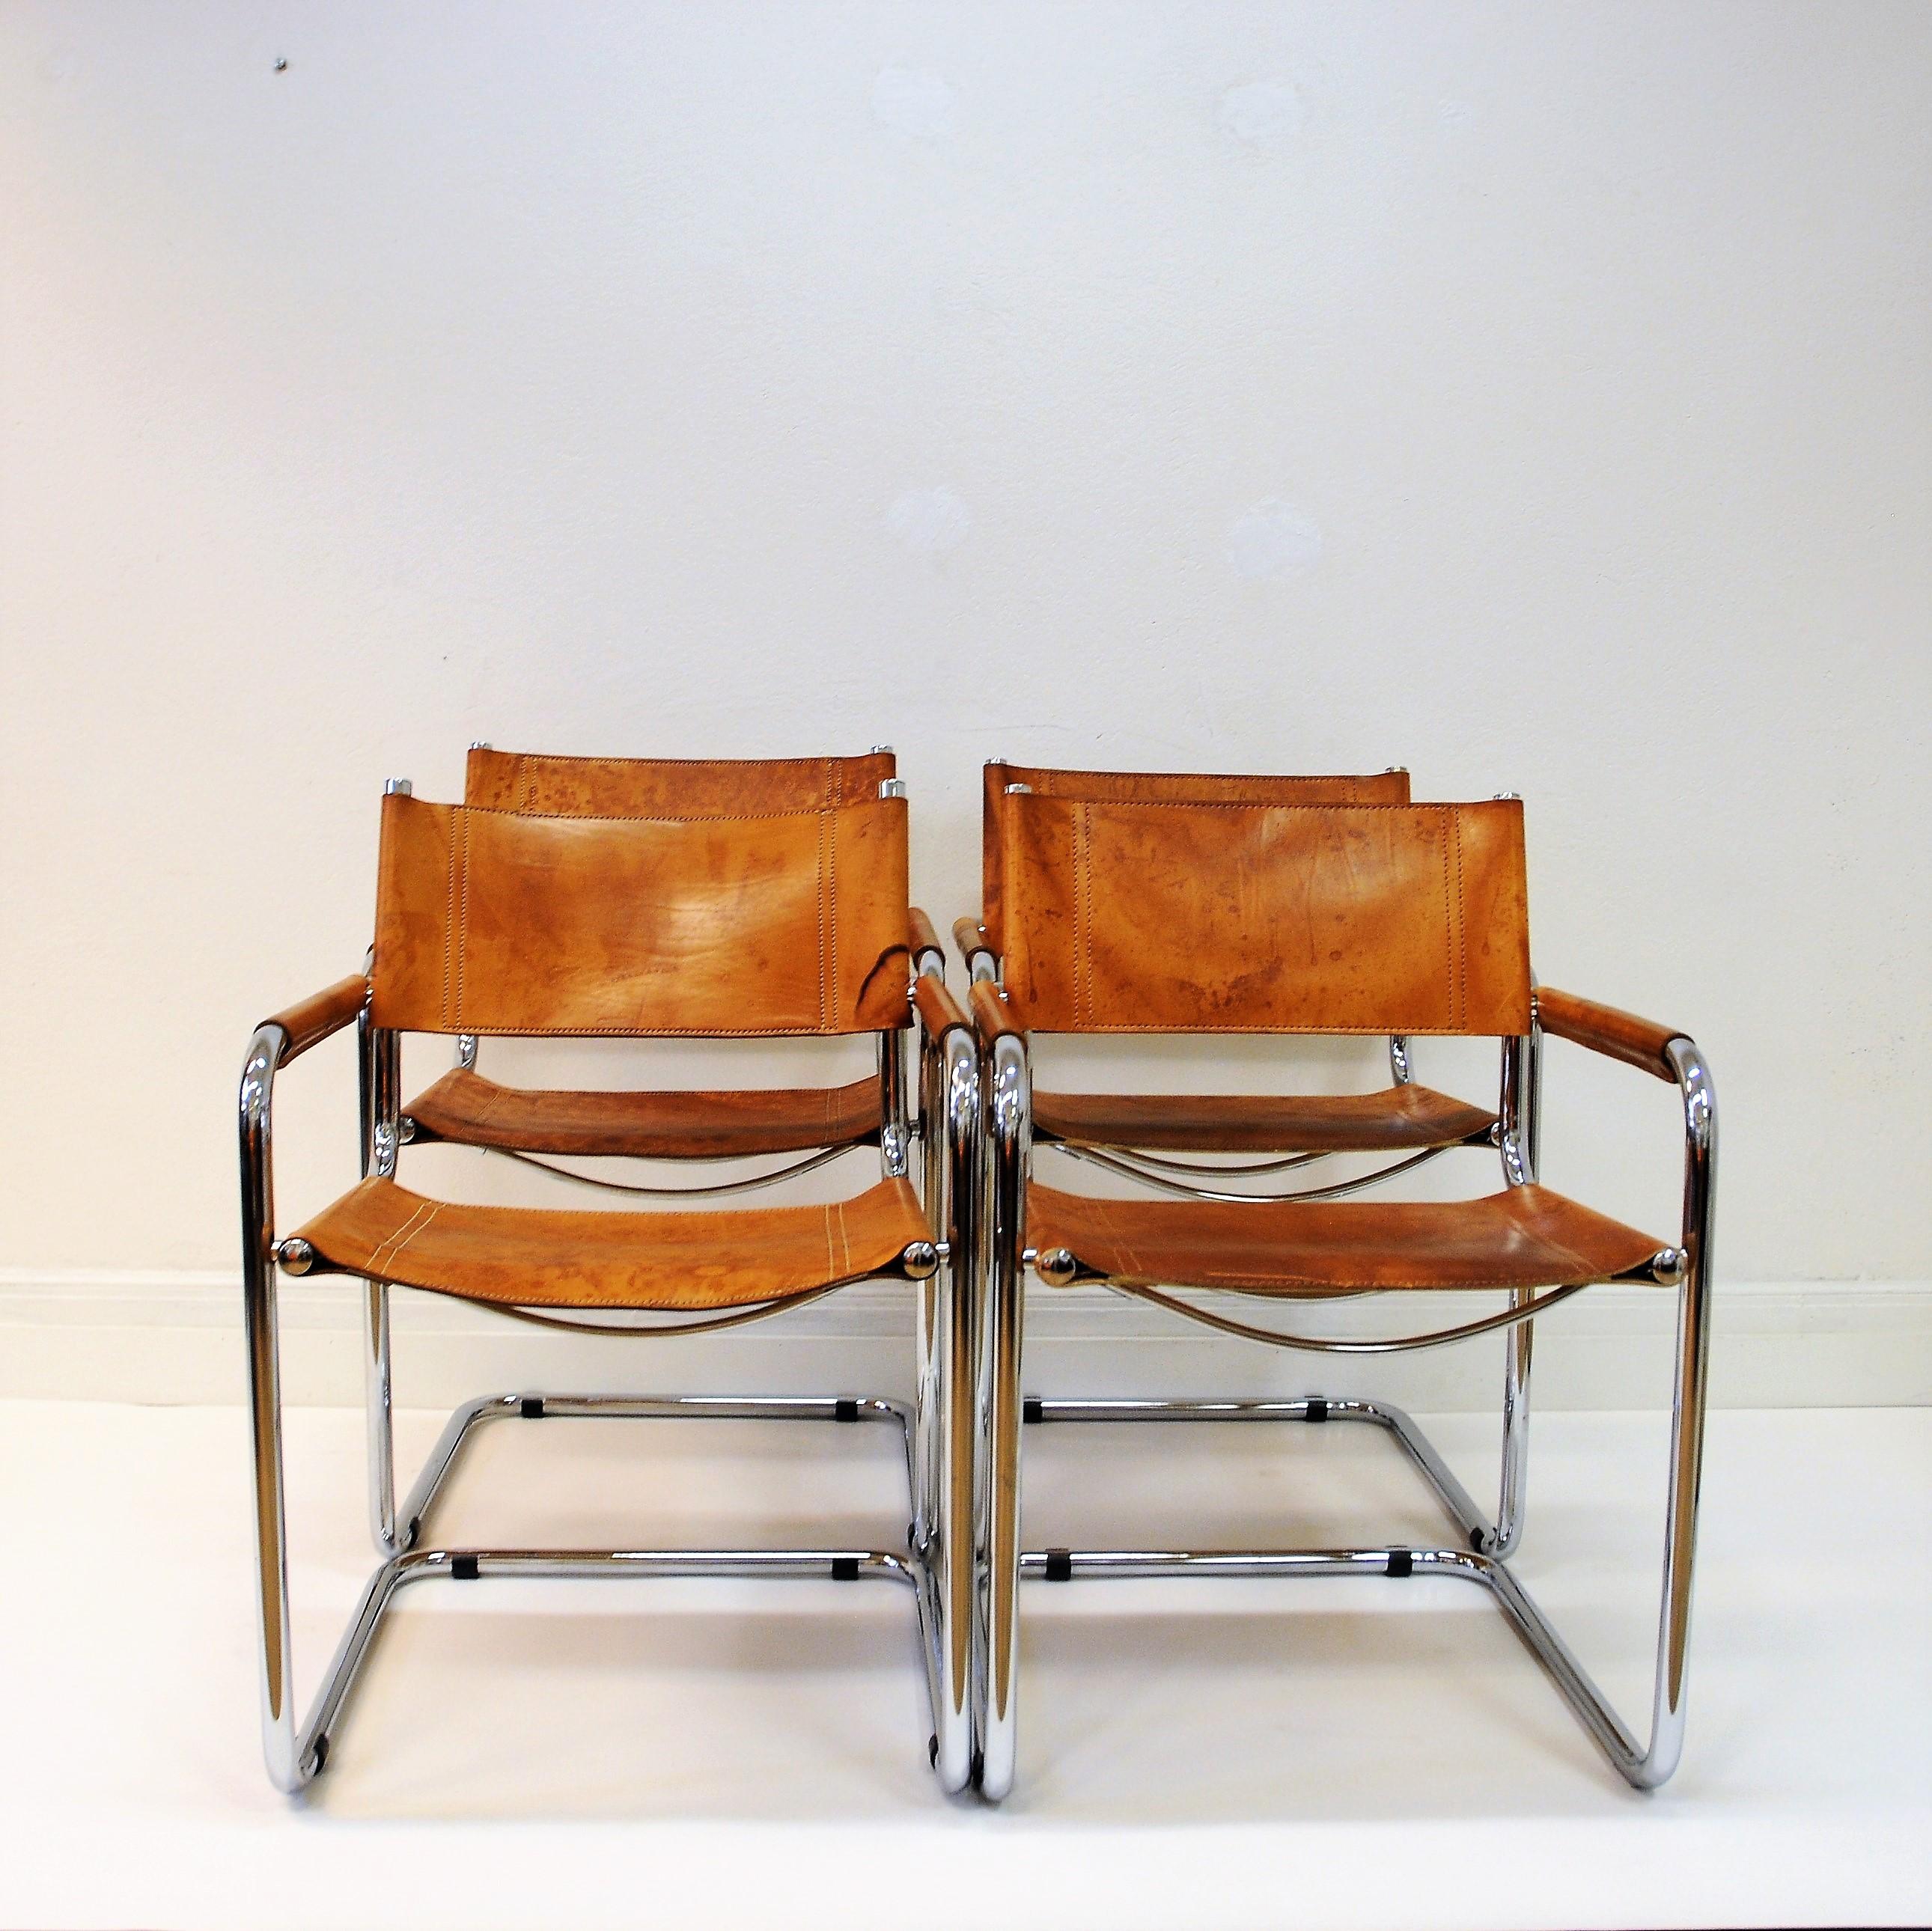 Four beautiful armchairs in cognac leather by designer Mart Stam for Fasem- Italy. The leather seats and backrests are supported by tubular frames. The chairs have a cantilevered tubular metal frame with cognac leather seating and backrest. The